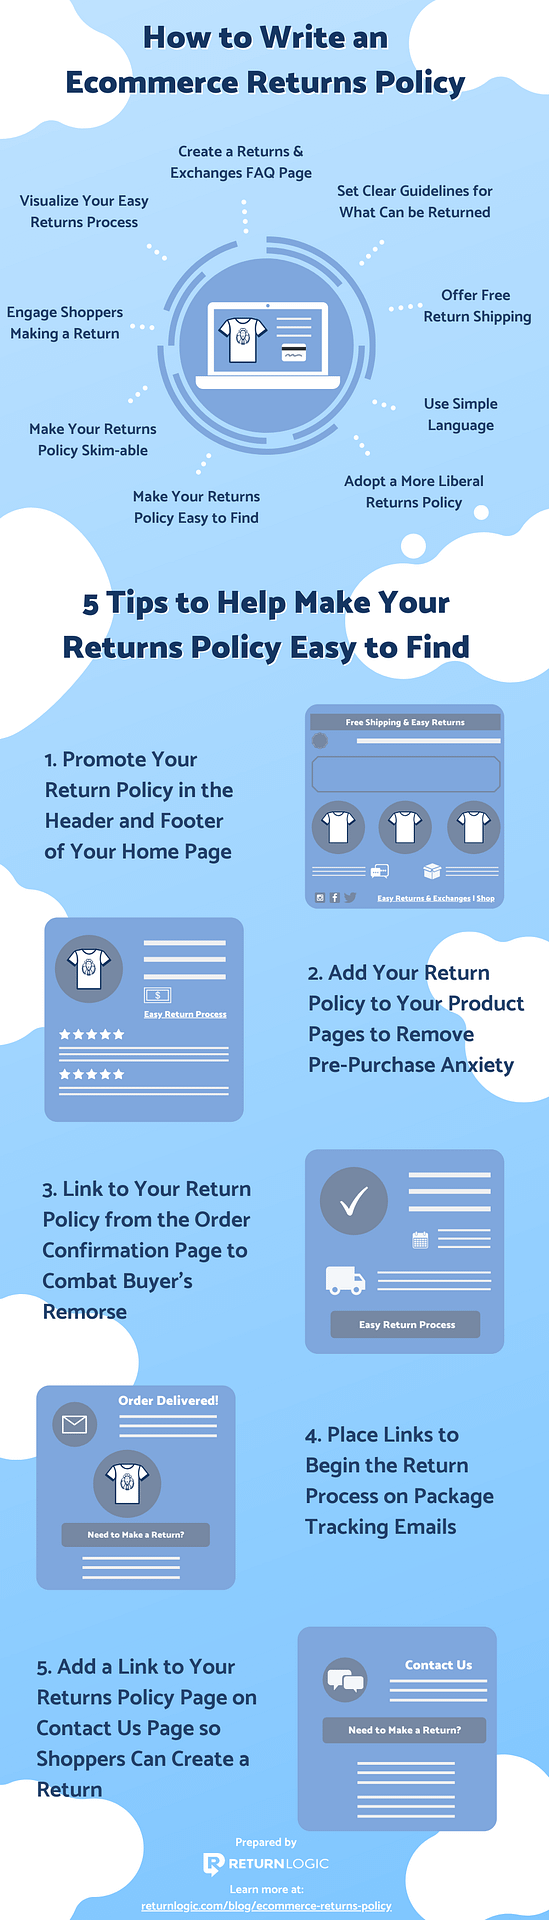 ecommerce-return-policy-infographic